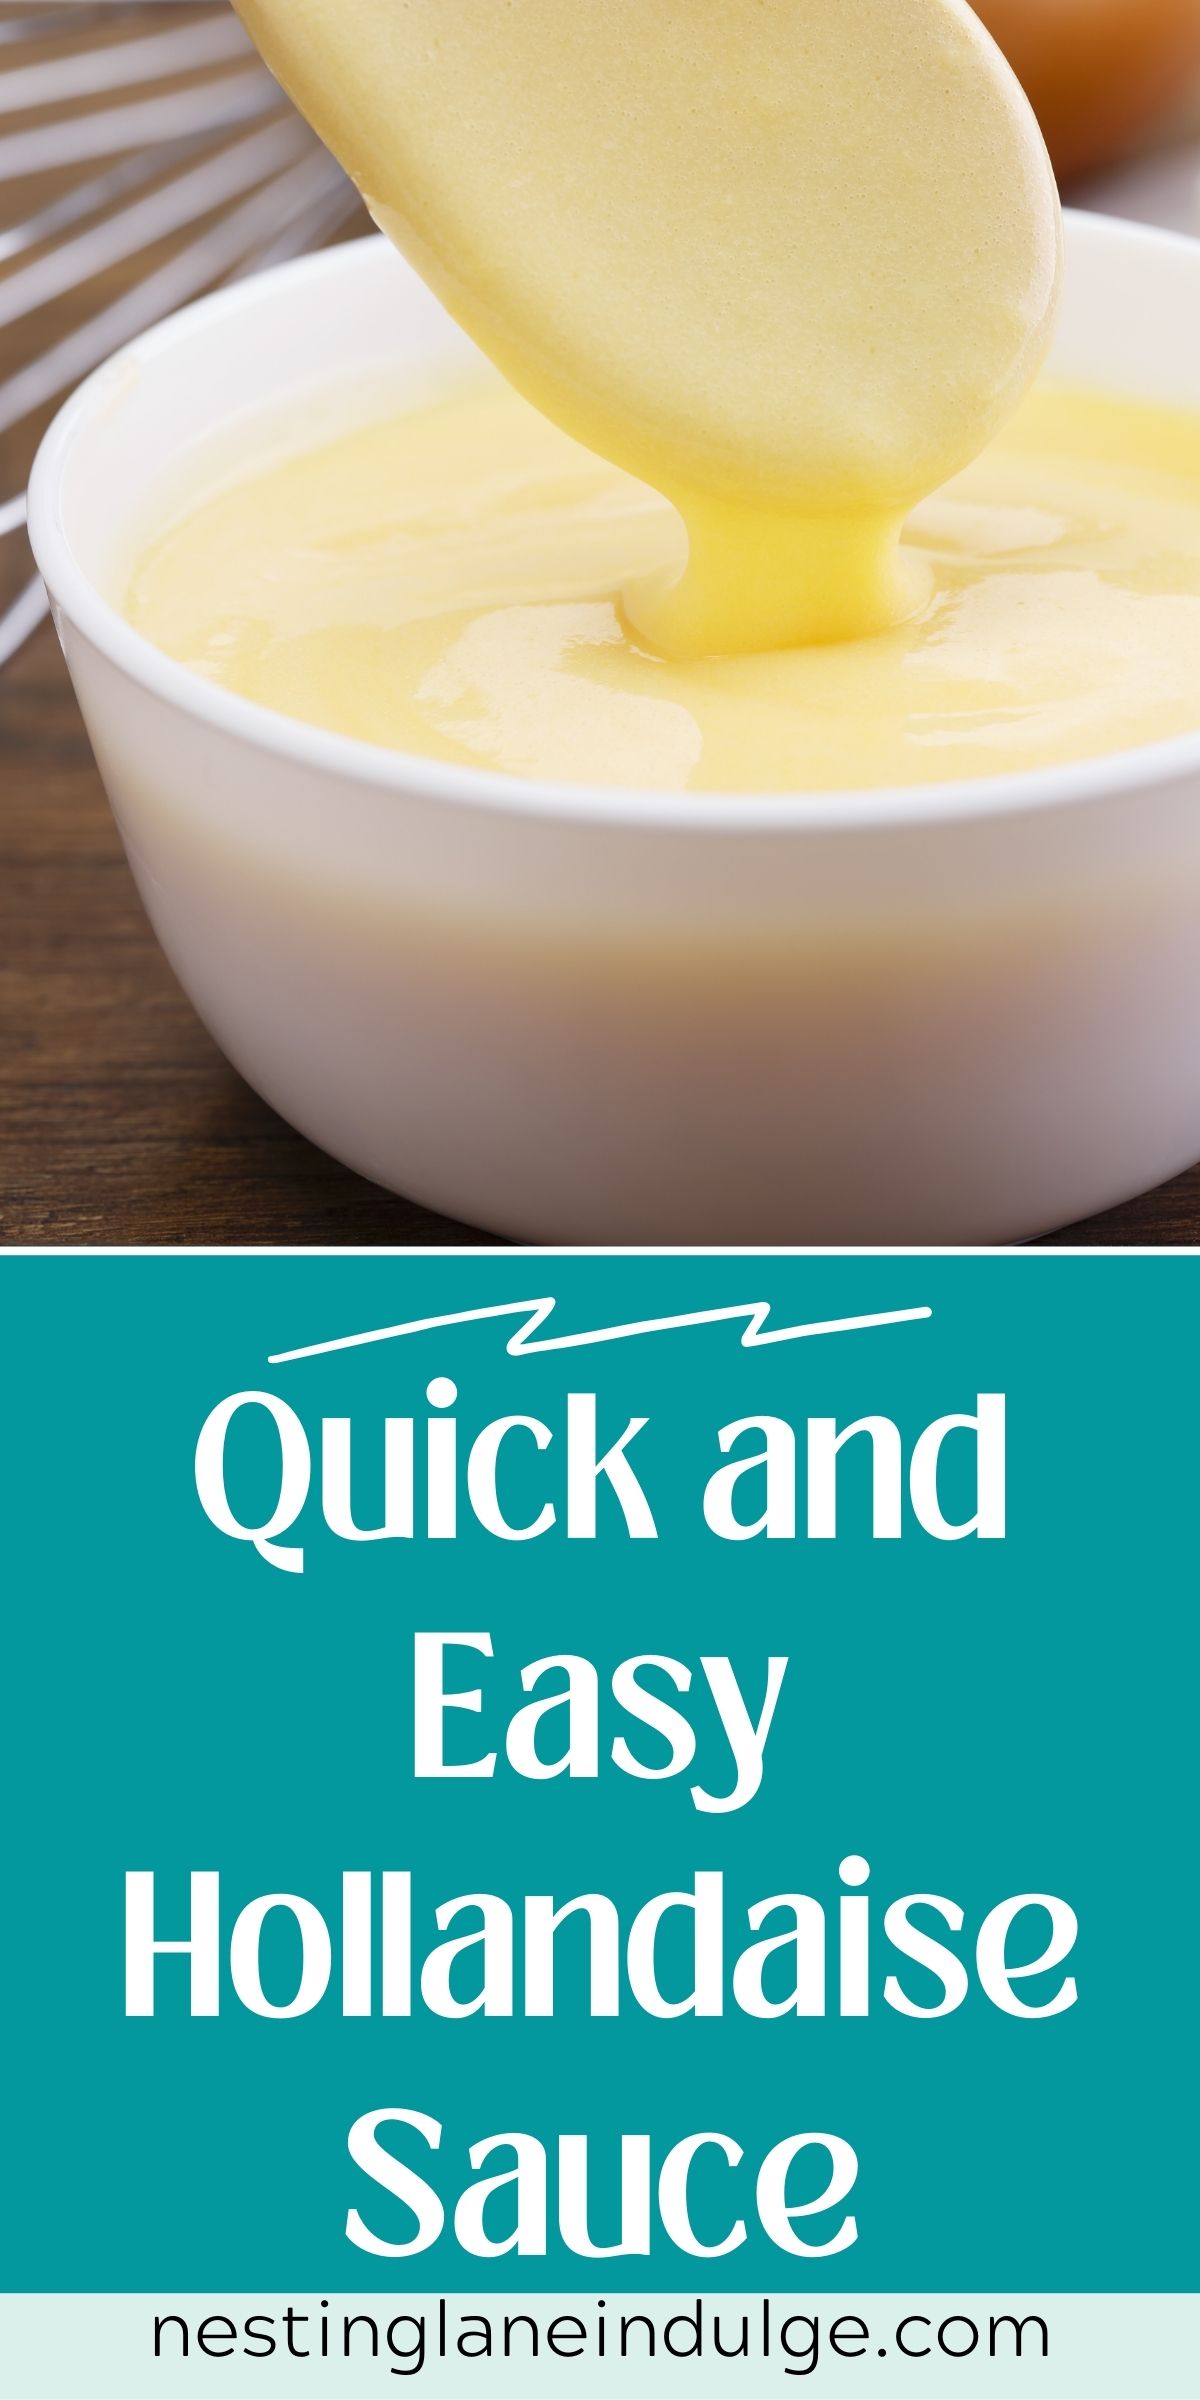 Graphic for Pinterest of Quick and Easy Hollandaise Sauce Recipe.